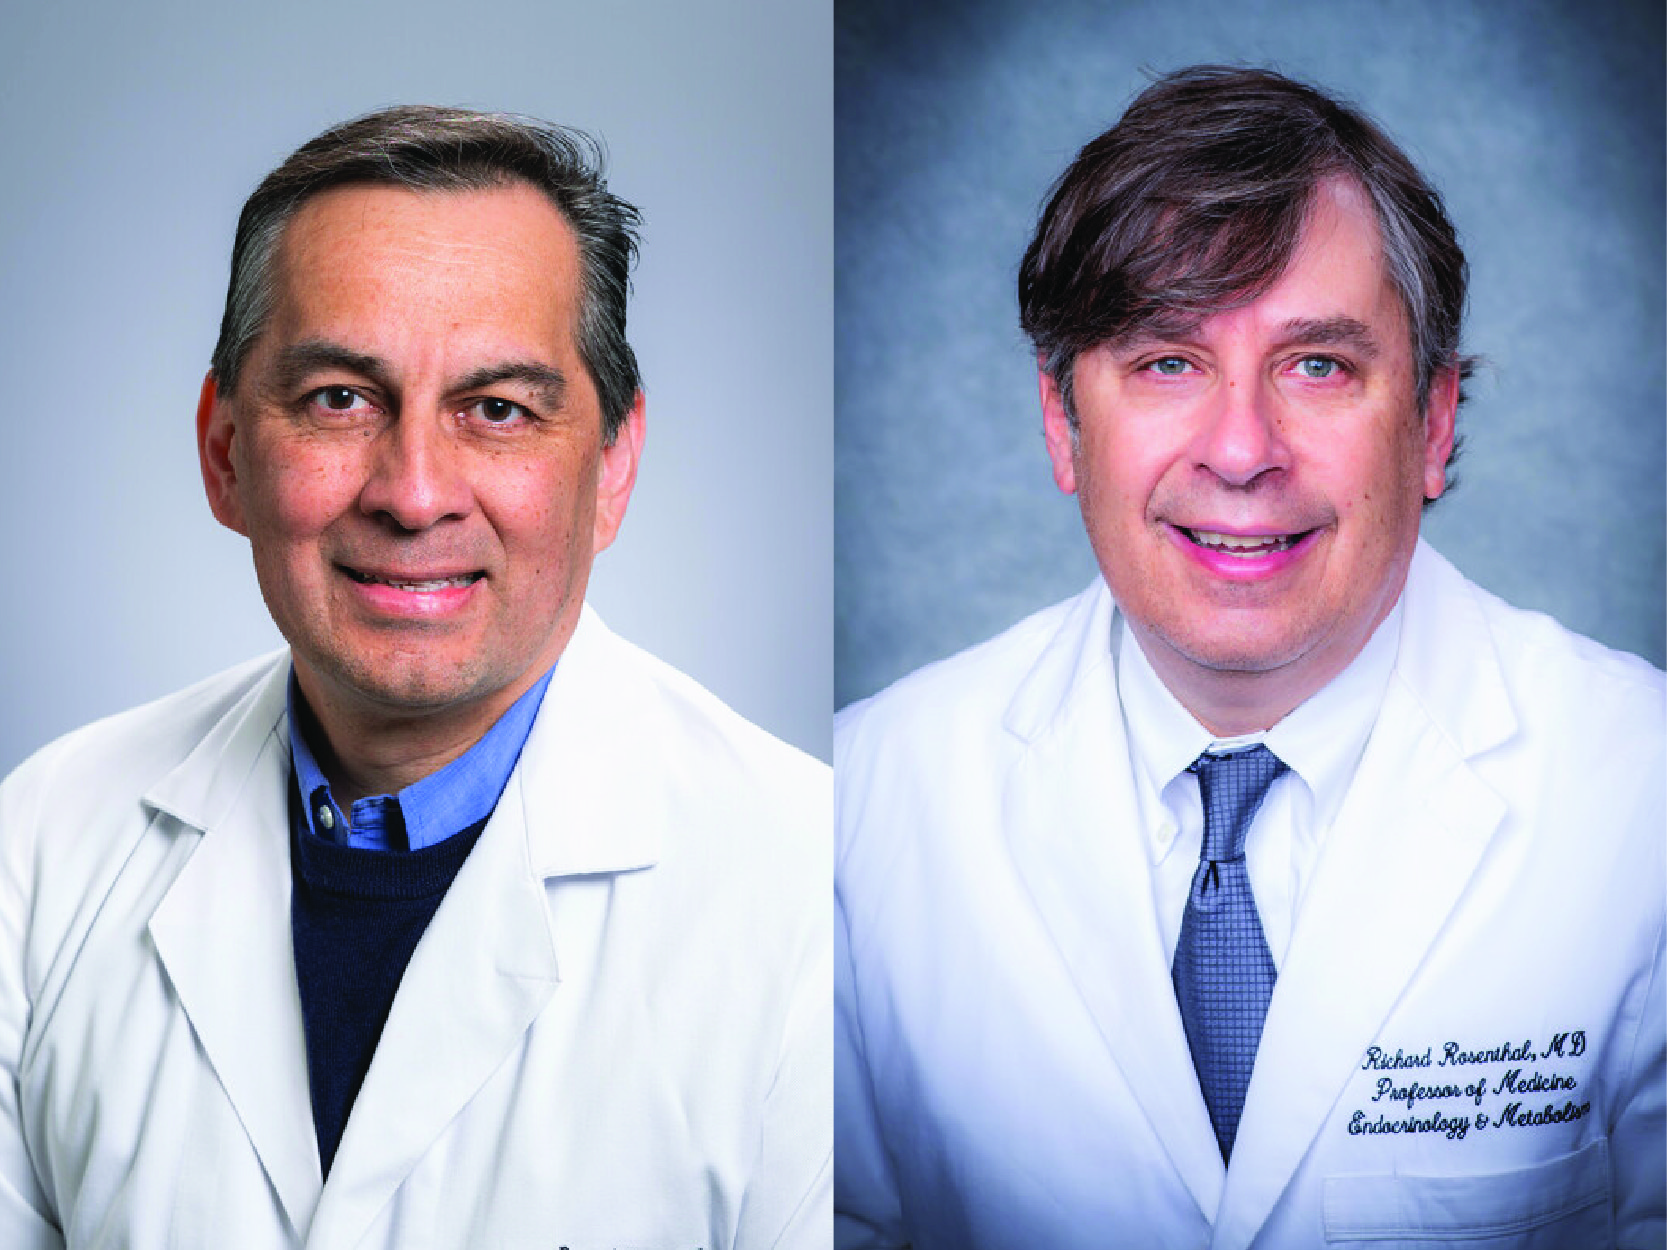 Drs. Ovalle and Rosenthal